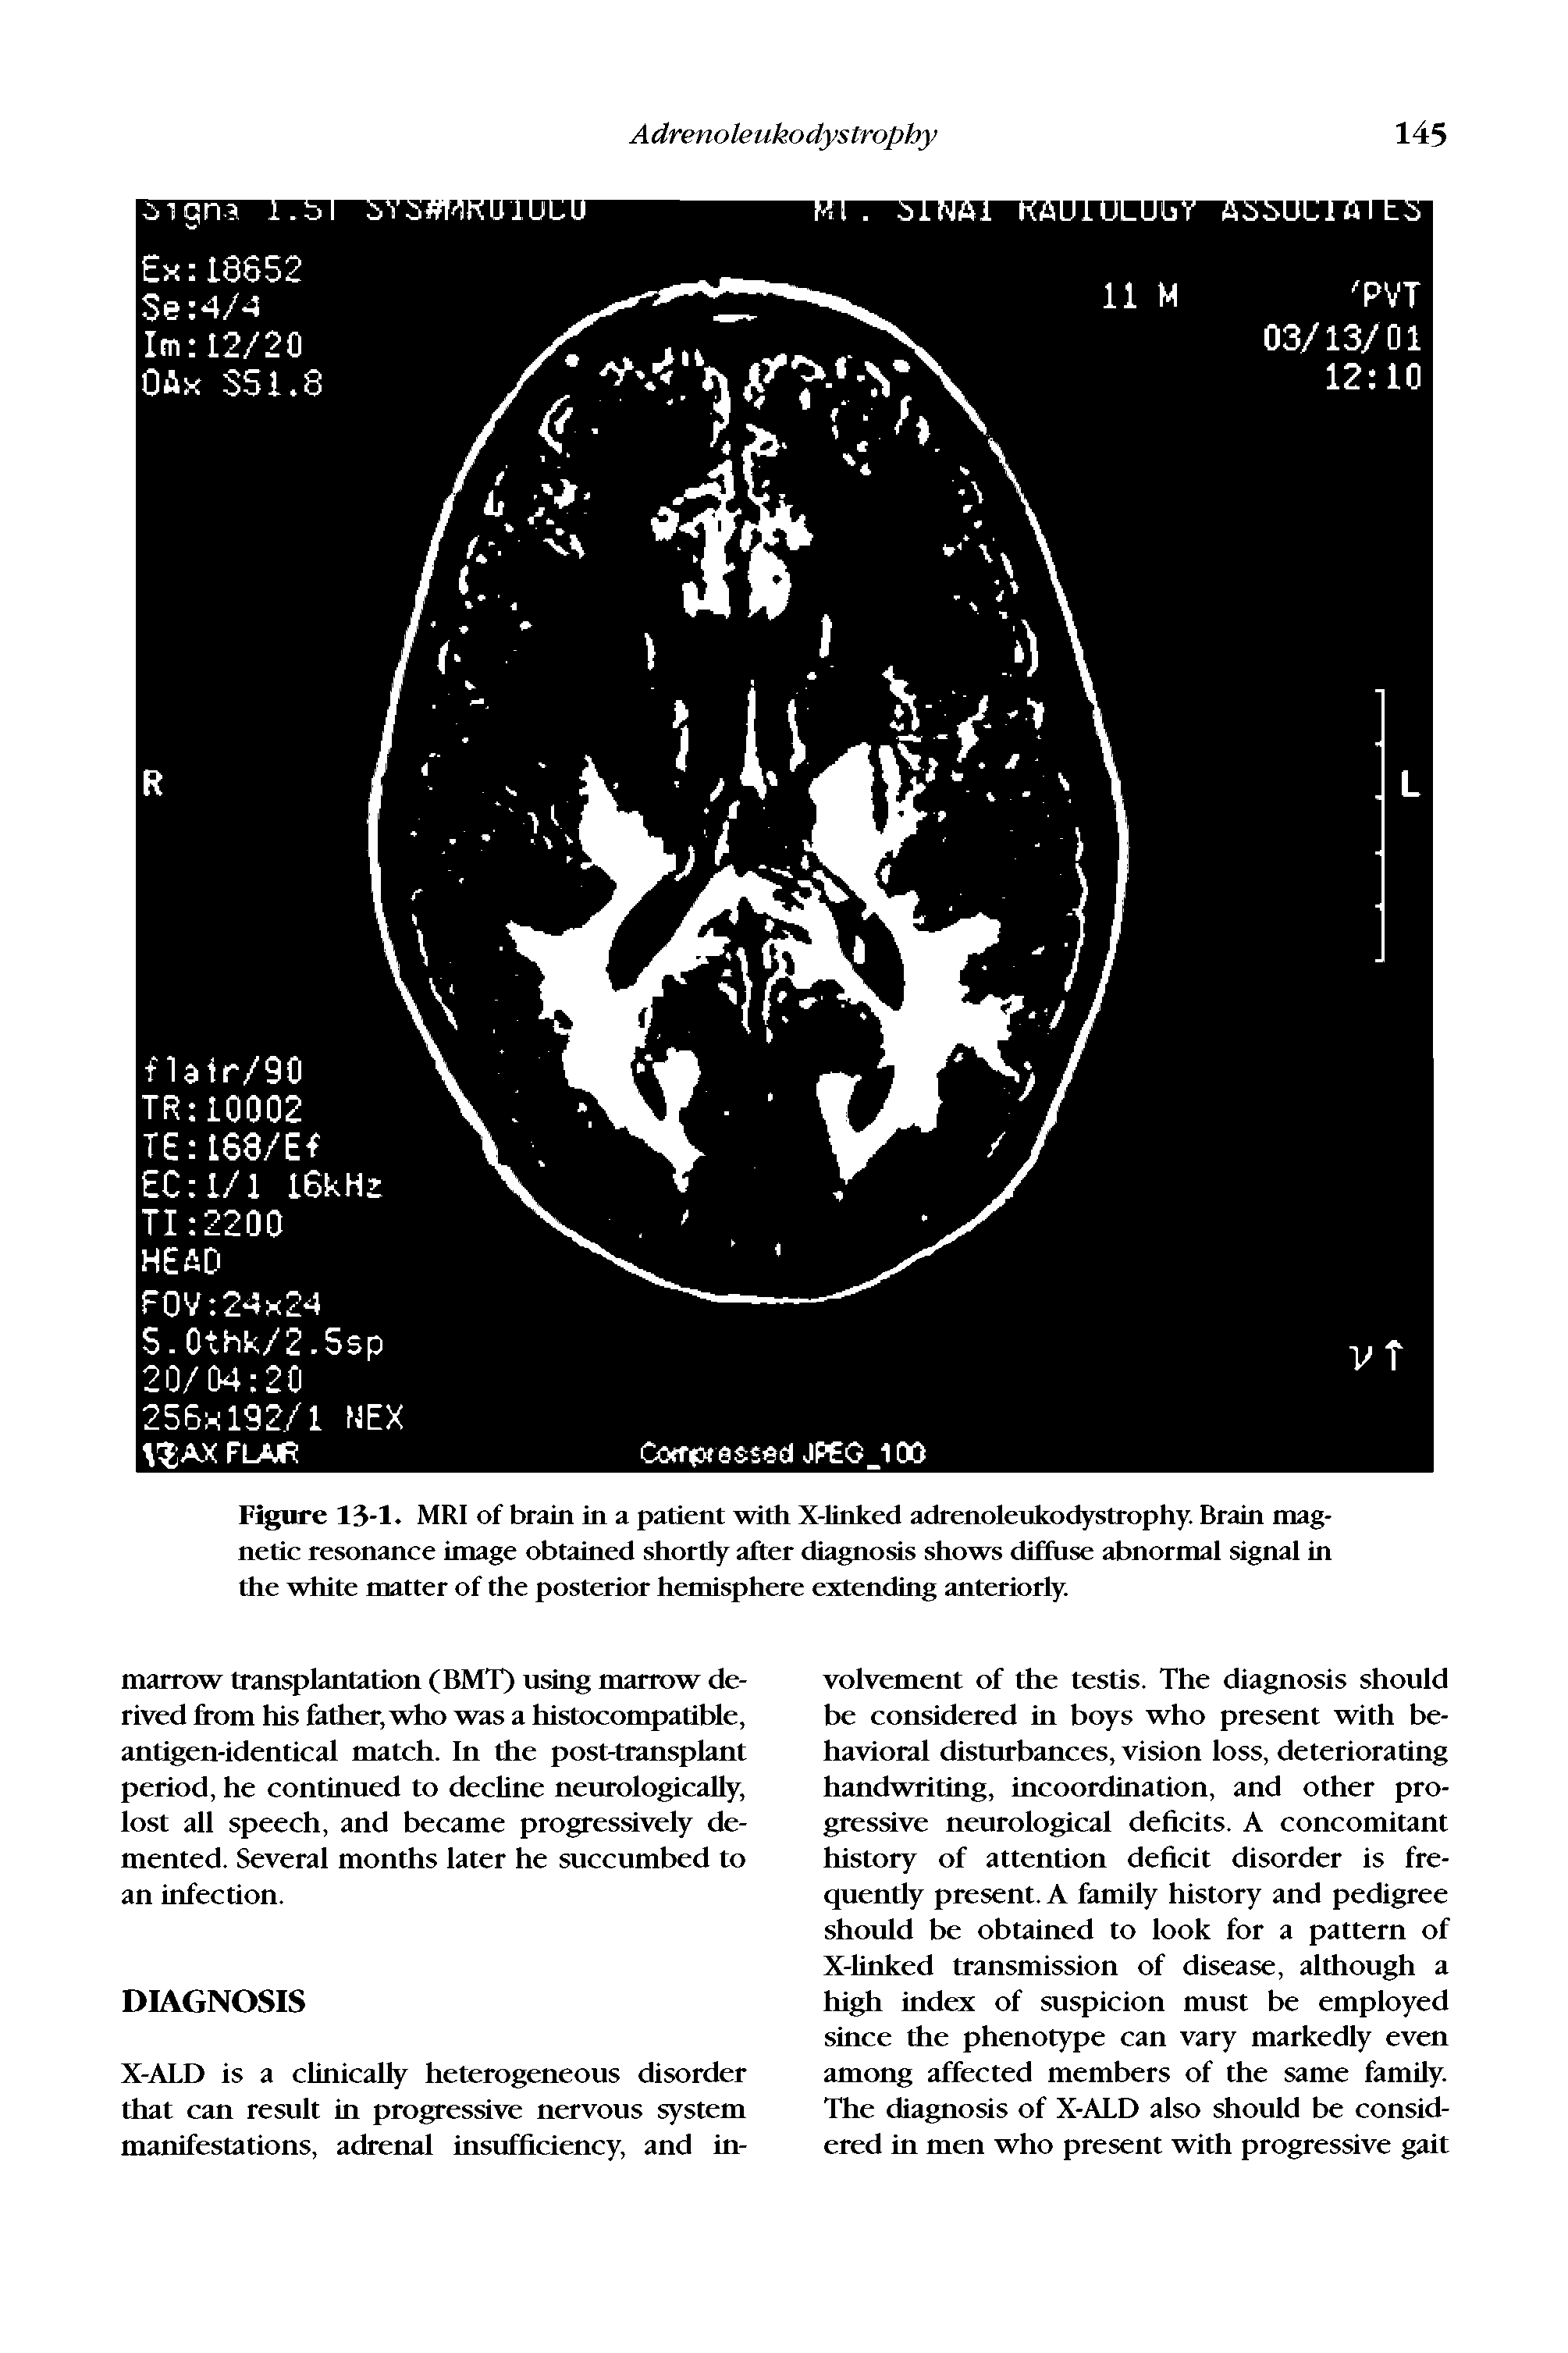 Figure 13-1. MRI of brain in a patient with X-Iinked adrenoleukodystrophy. Brain magnetic resonance image obtained shortly after diagnosis shows diffuse abnormal signal in the white matter of the posterior hemisphere extending anteriorly.